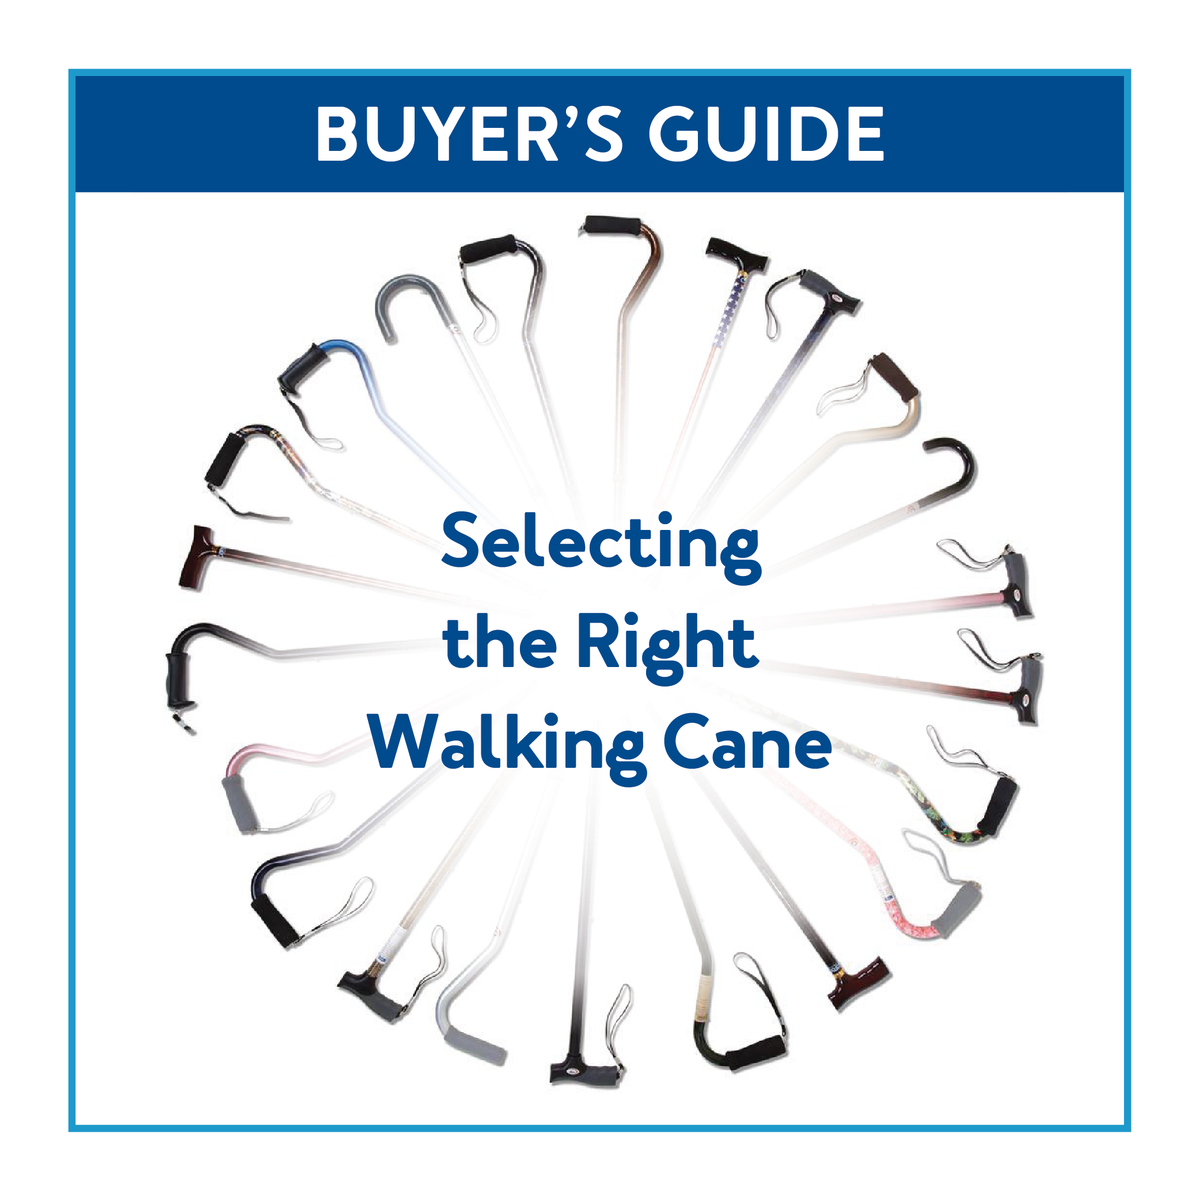 Various walking canes arranged in a circle surrounded by a blue border with text Buyer’s Guide: Selecting the Right Walking Cane